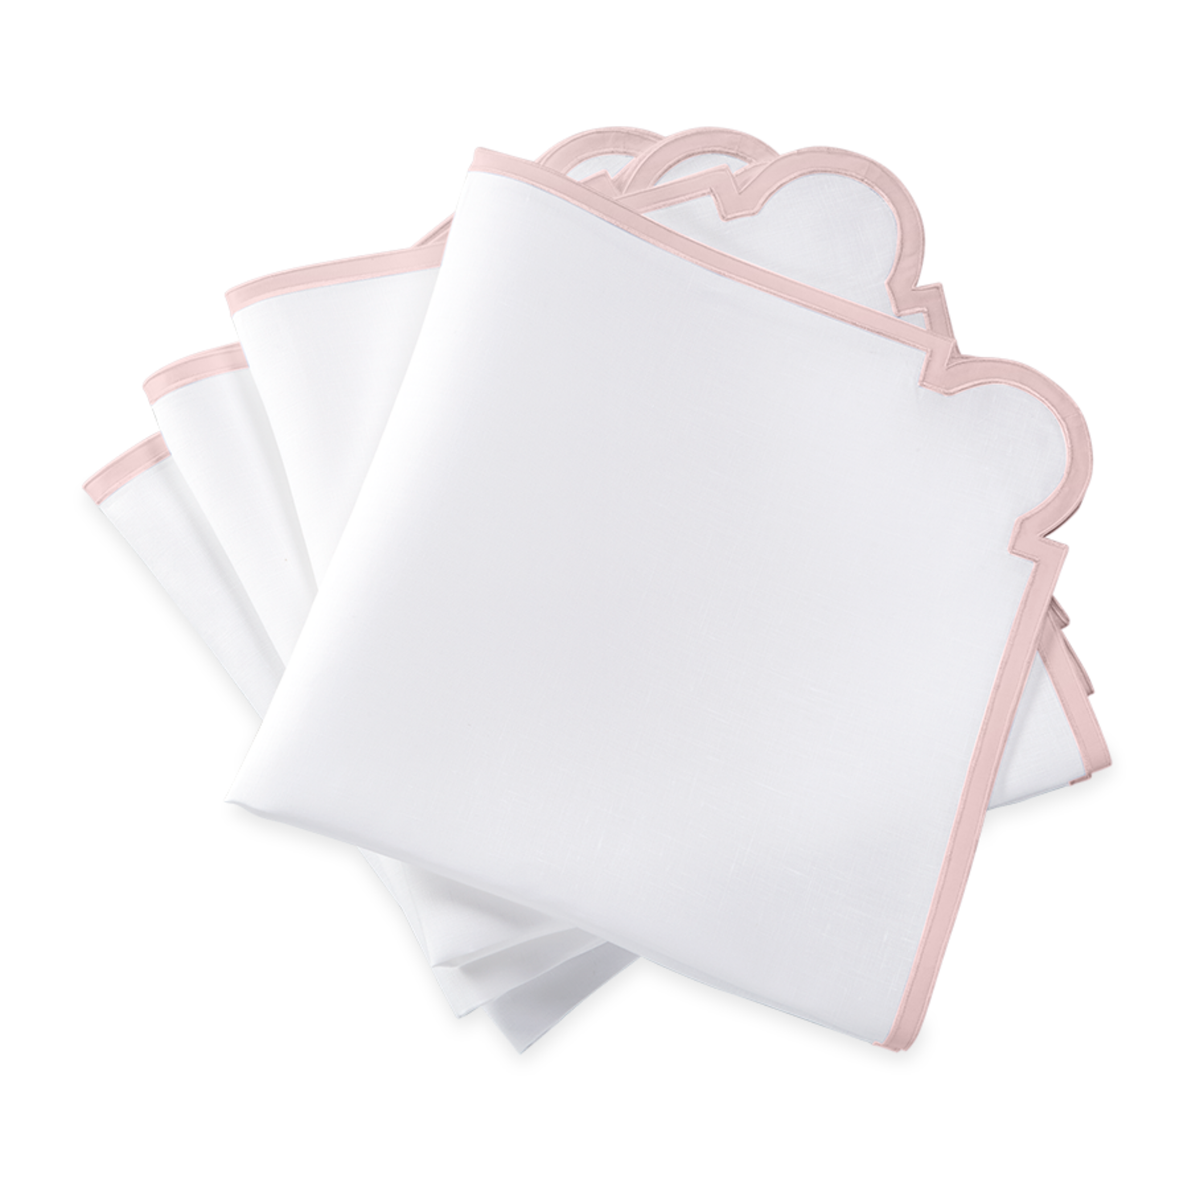 Stack of Matouk Mirasol Table Linen Napkins in Pink Color